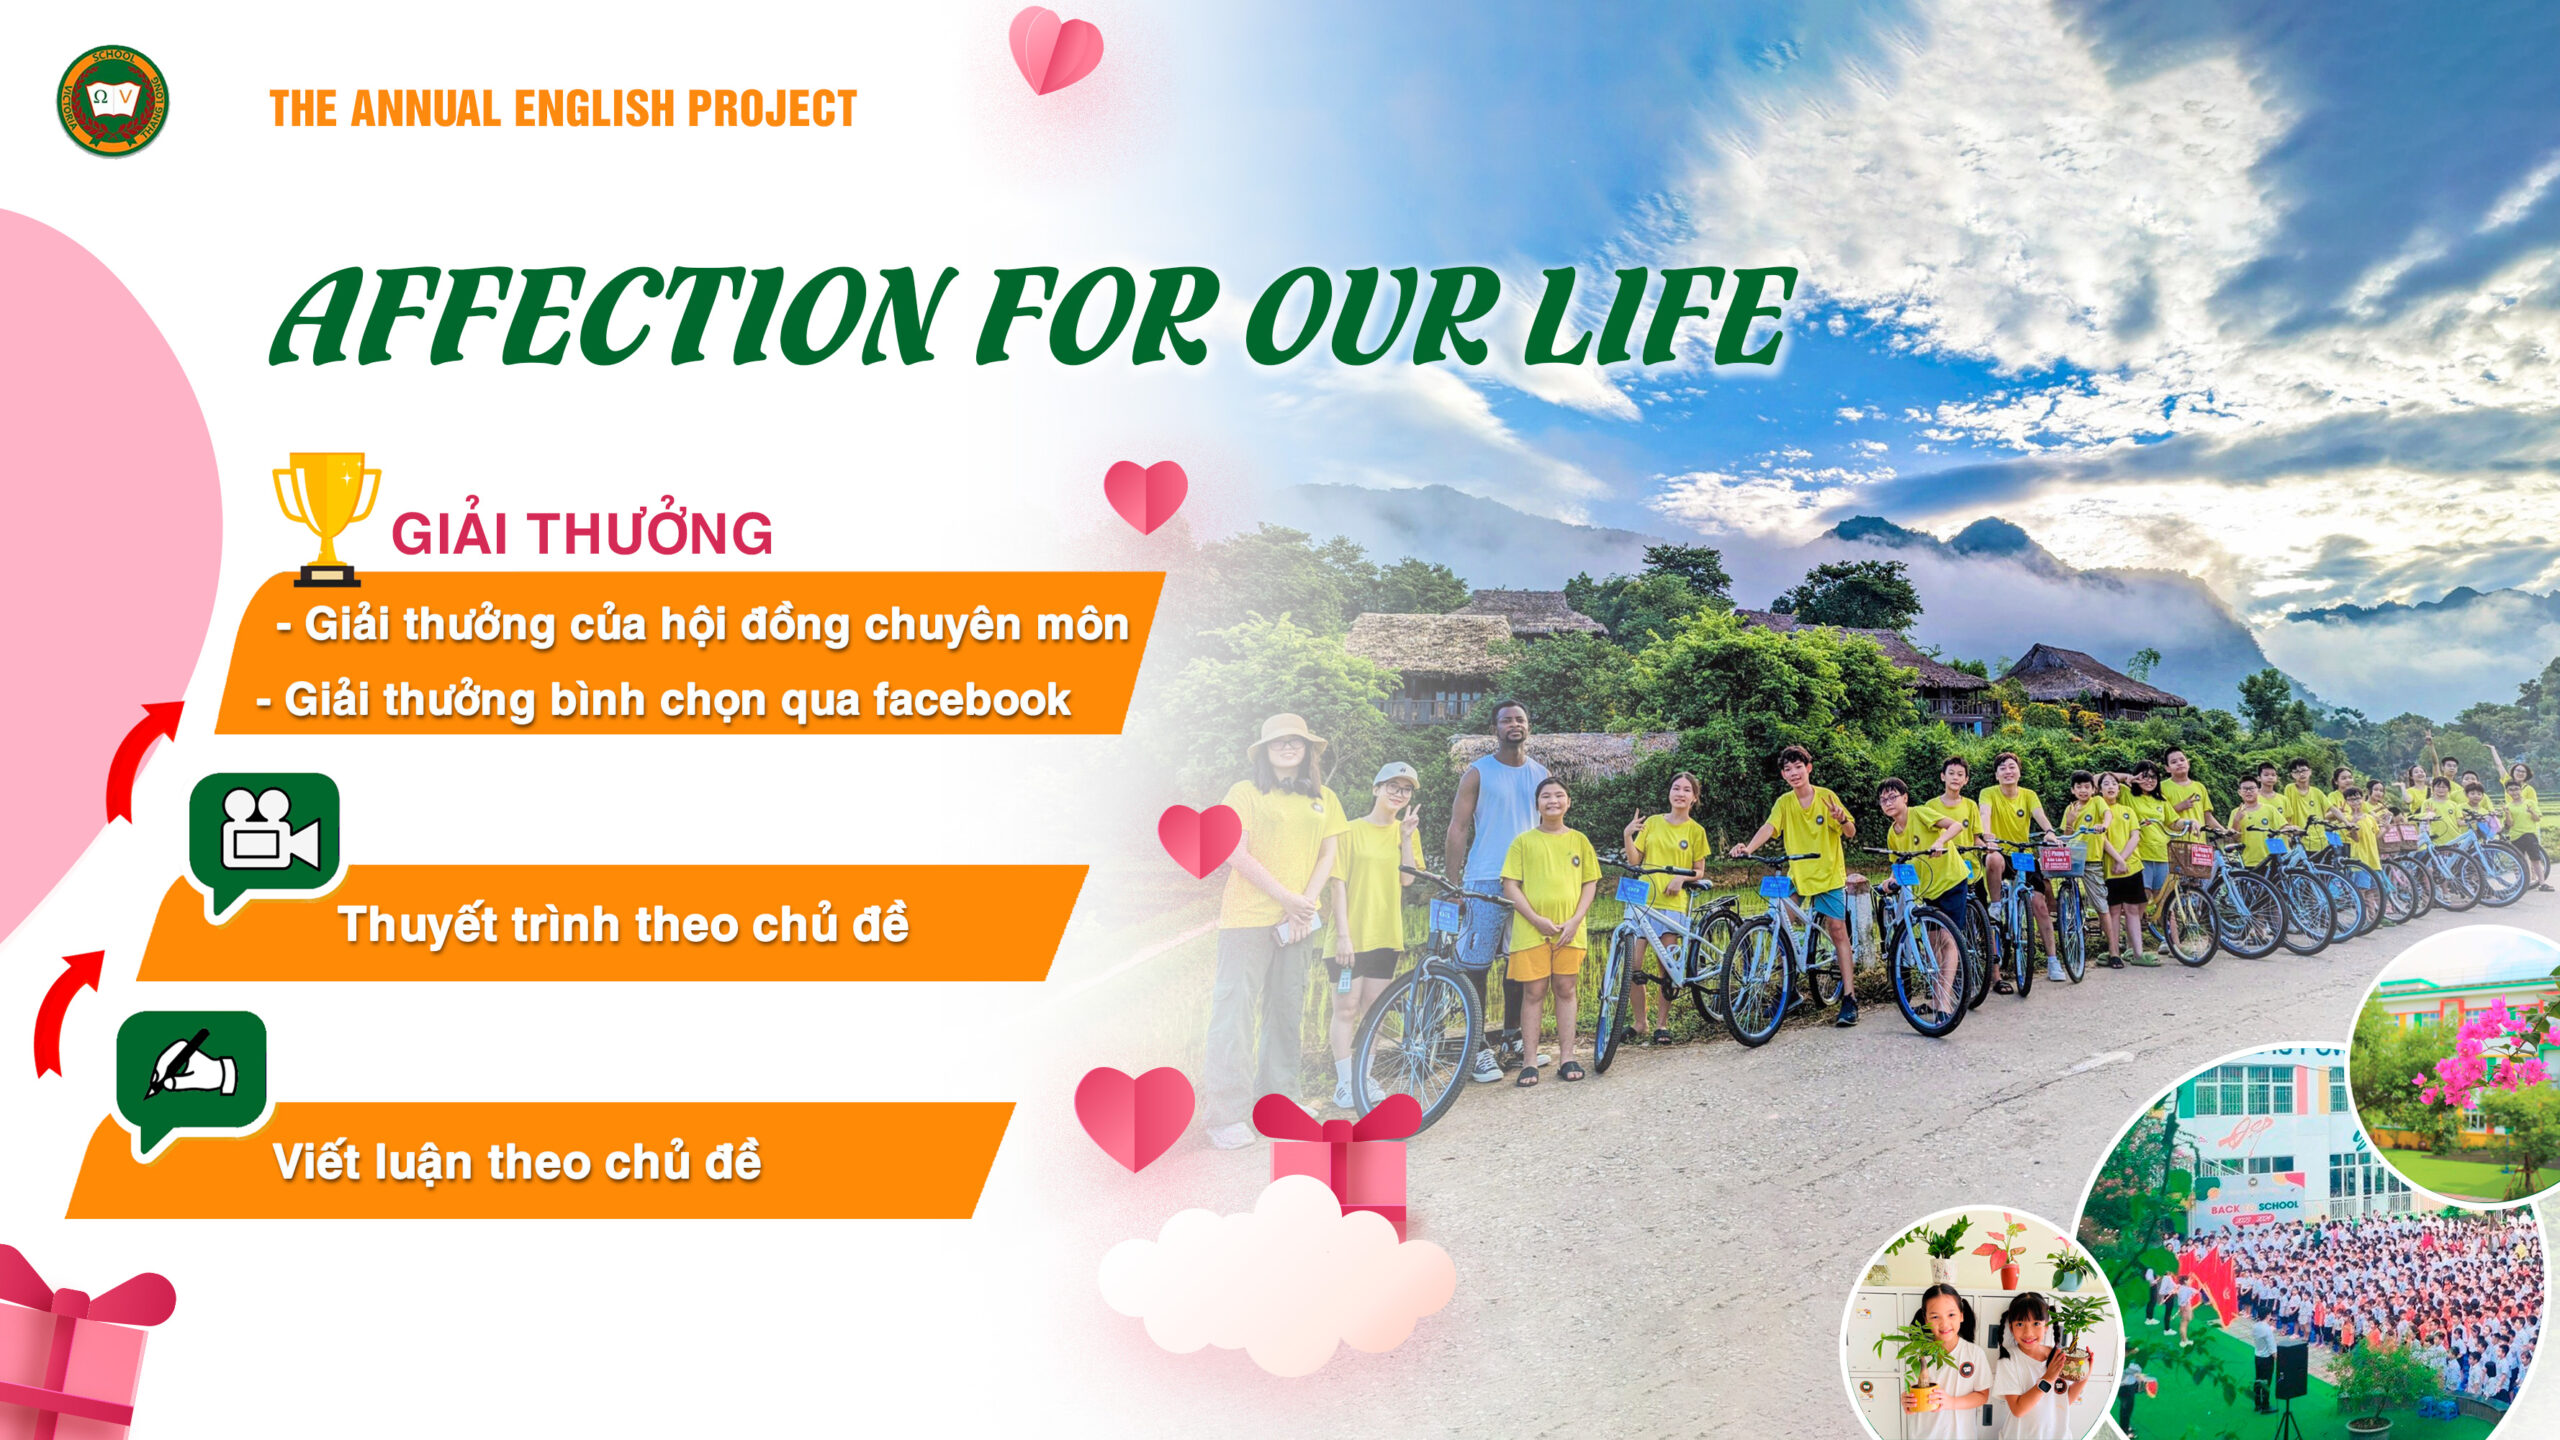 NHỊP ĐẬP “AFFECTION FOR OUR LIFE”